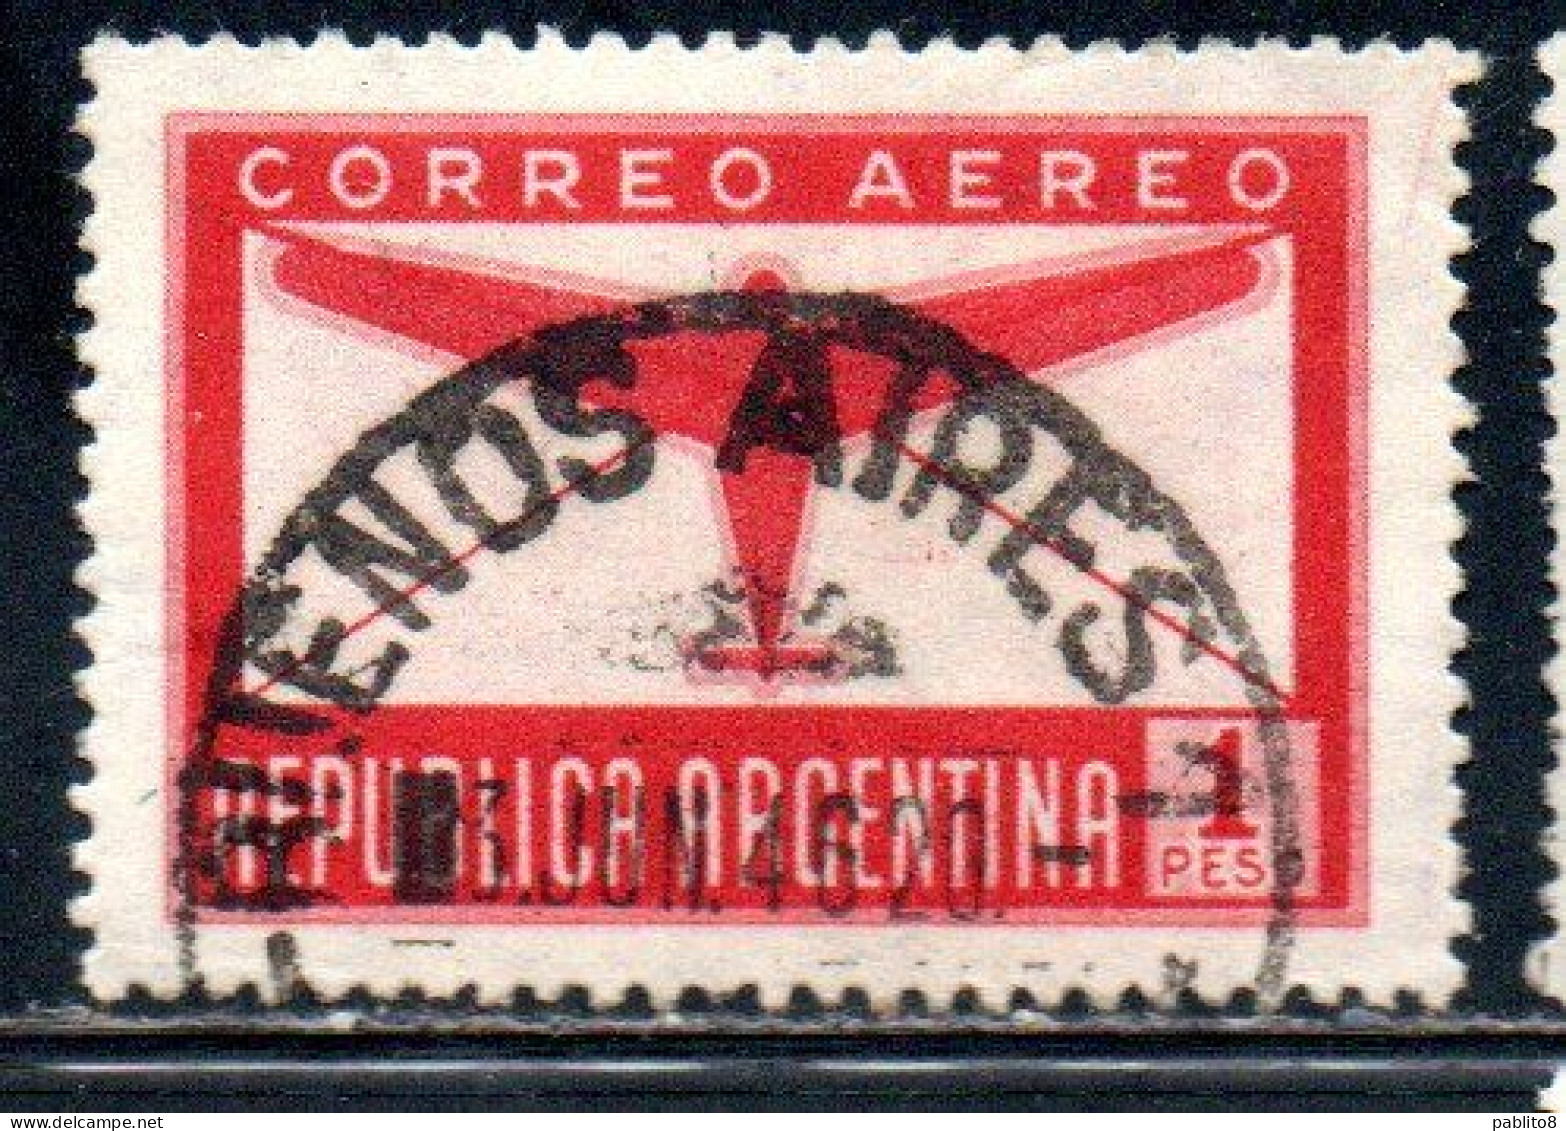 ARGENTINA 1940  AIR POST MAIL CORREO AEREO AIRMAIL PLANE AND LETTER 1p USED USADO OBLITERE' - Luftpost